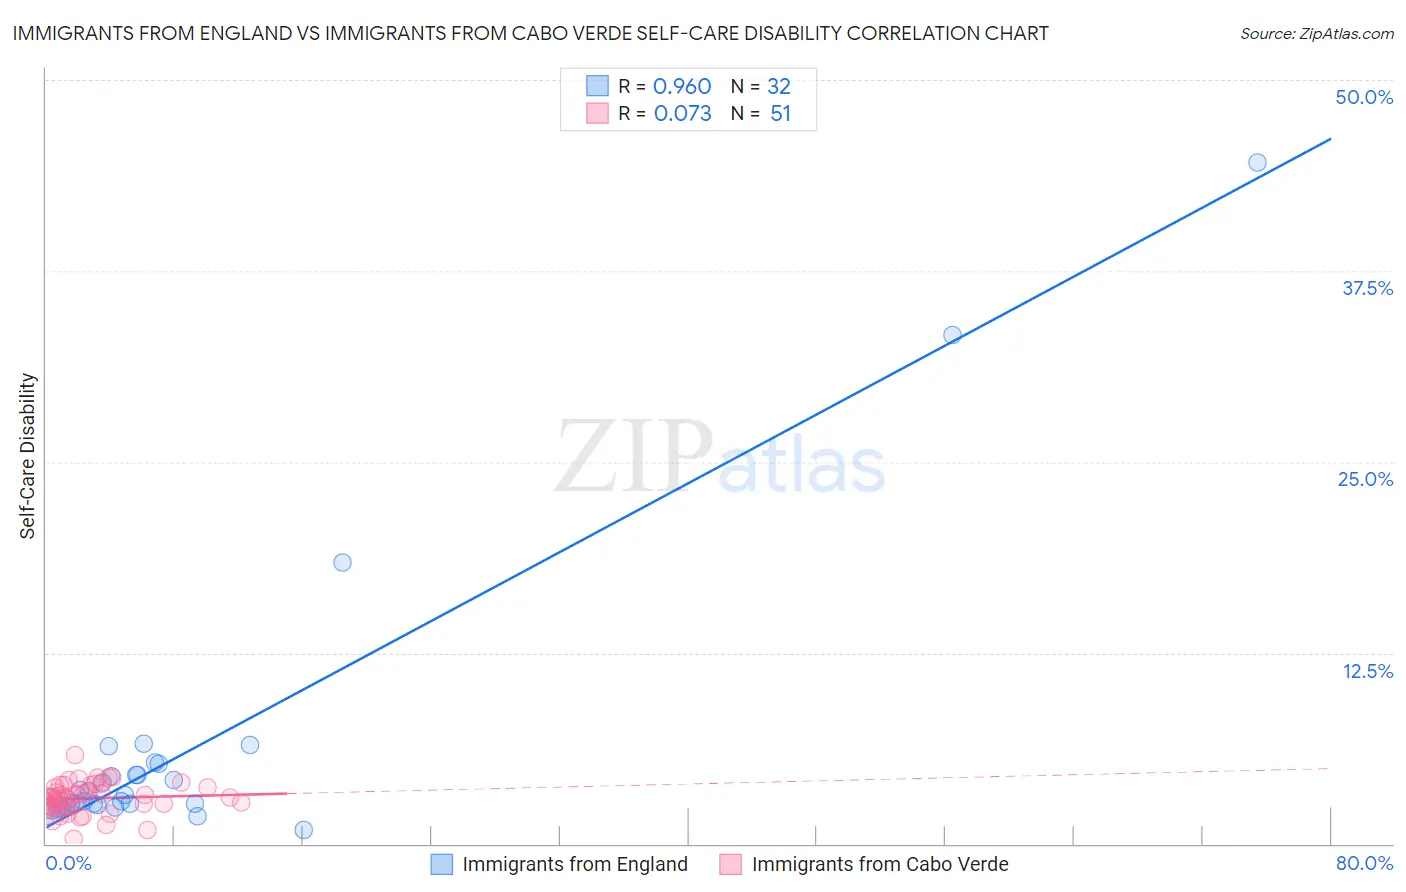 Immigrants from England vs Immigrants from Cabo Verde Self-Care Disability